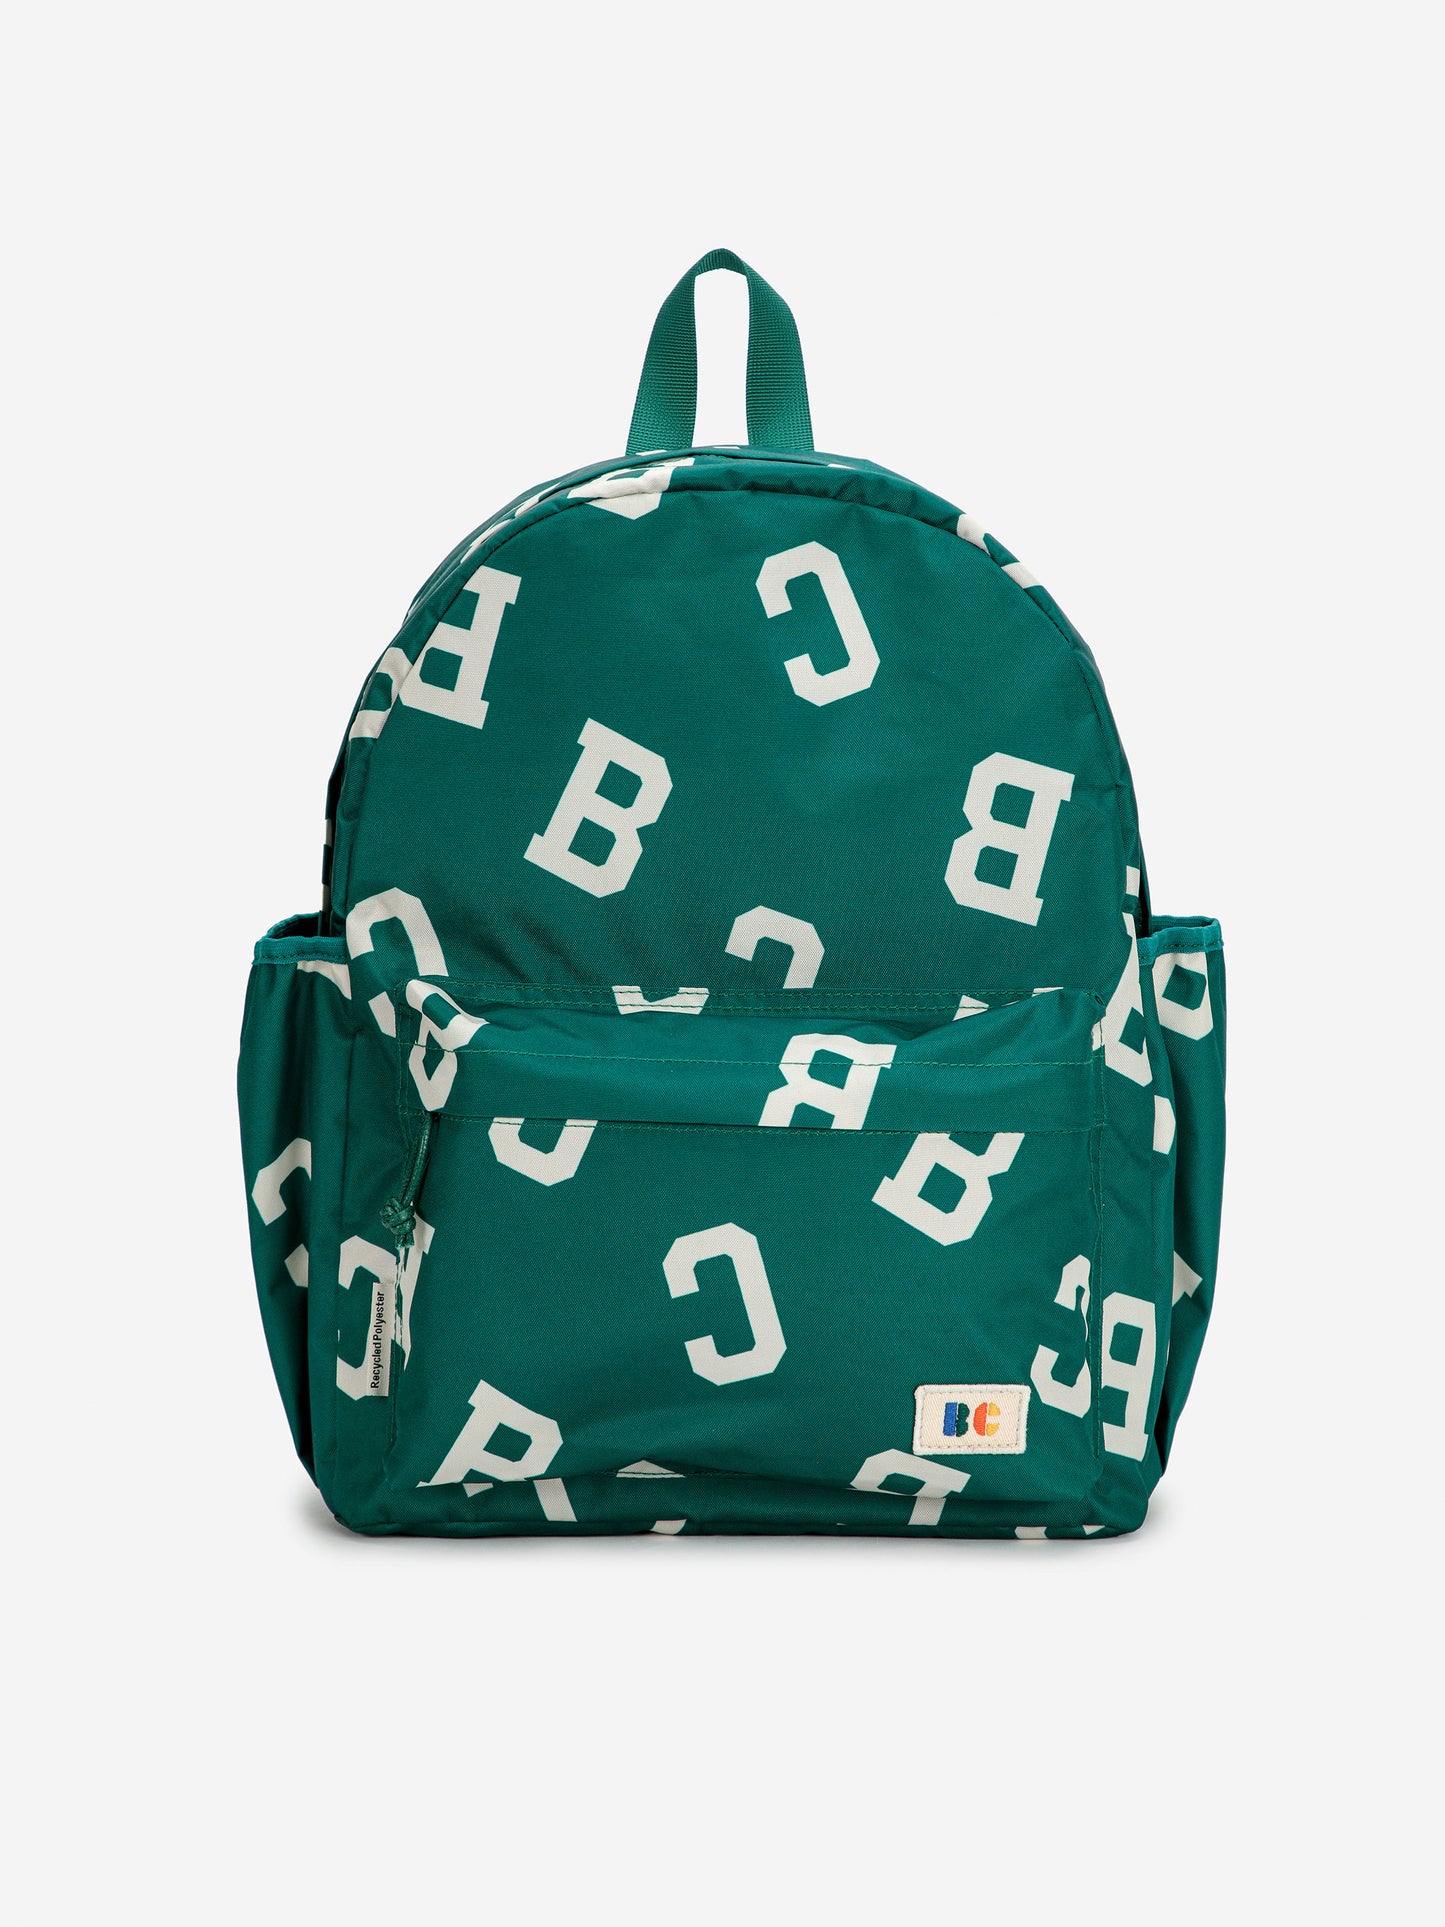 BC Green backpack